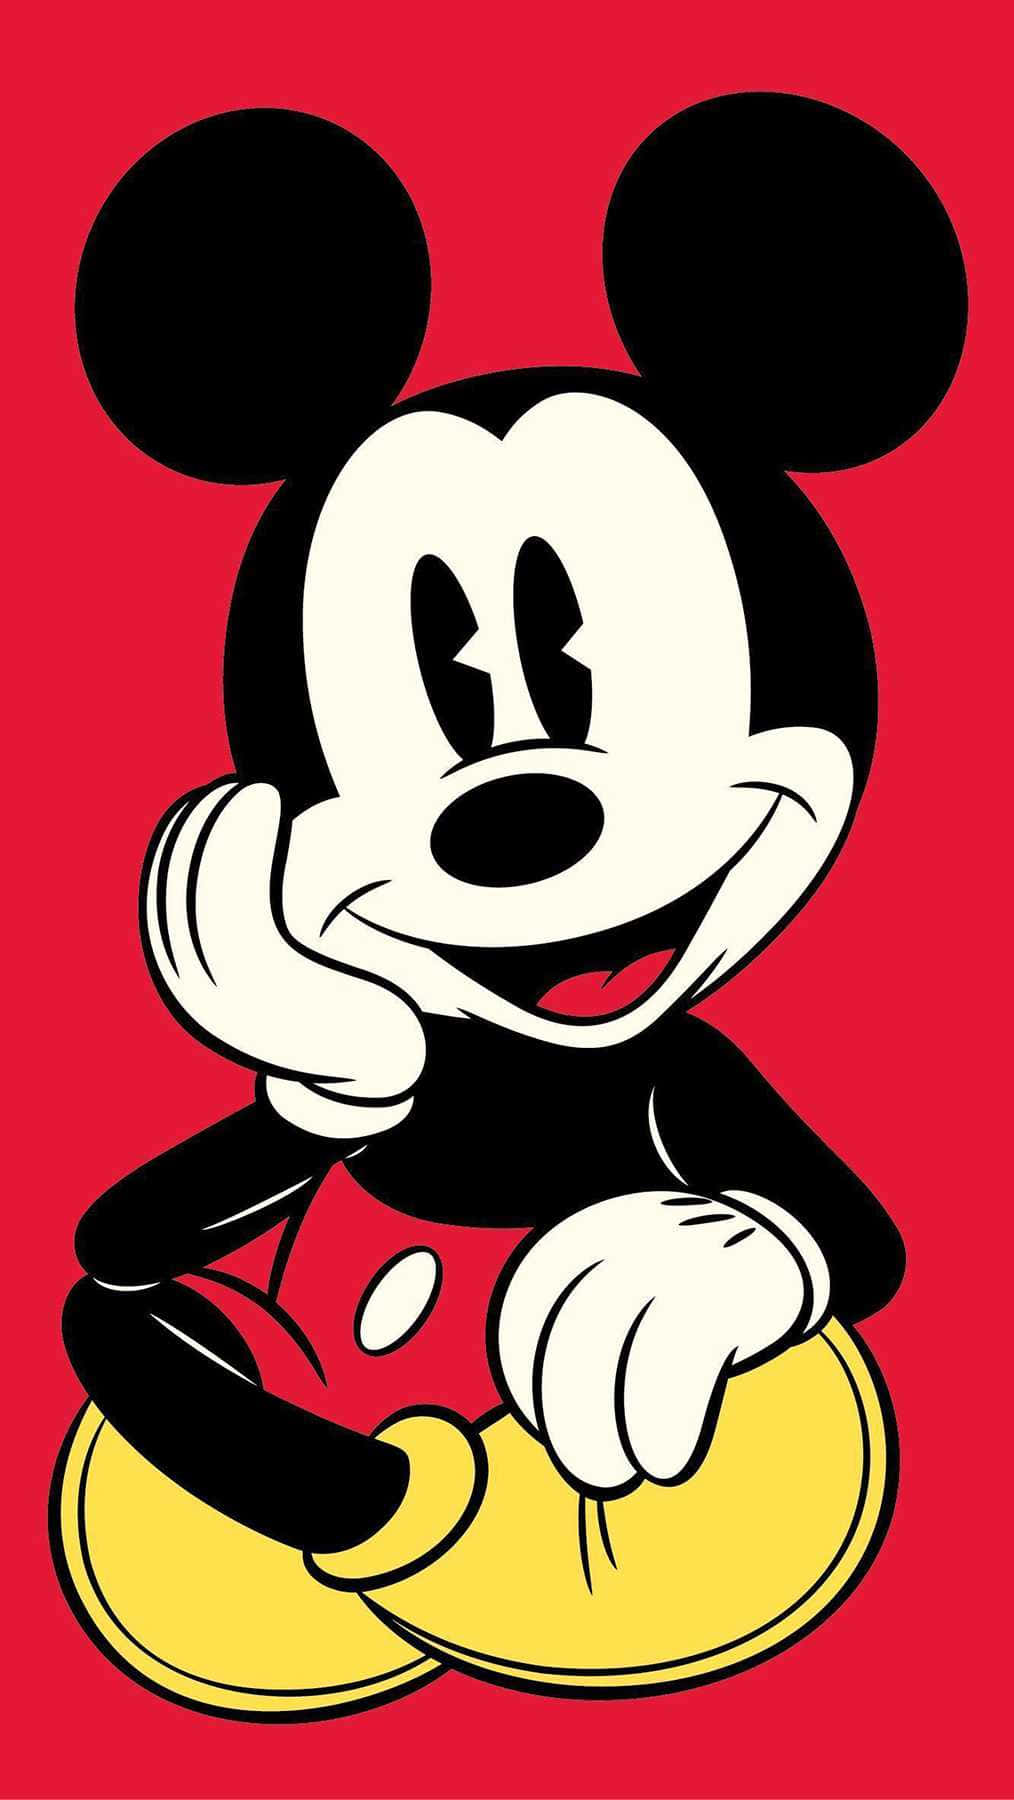 Look cool with Mickey! Wallpaper